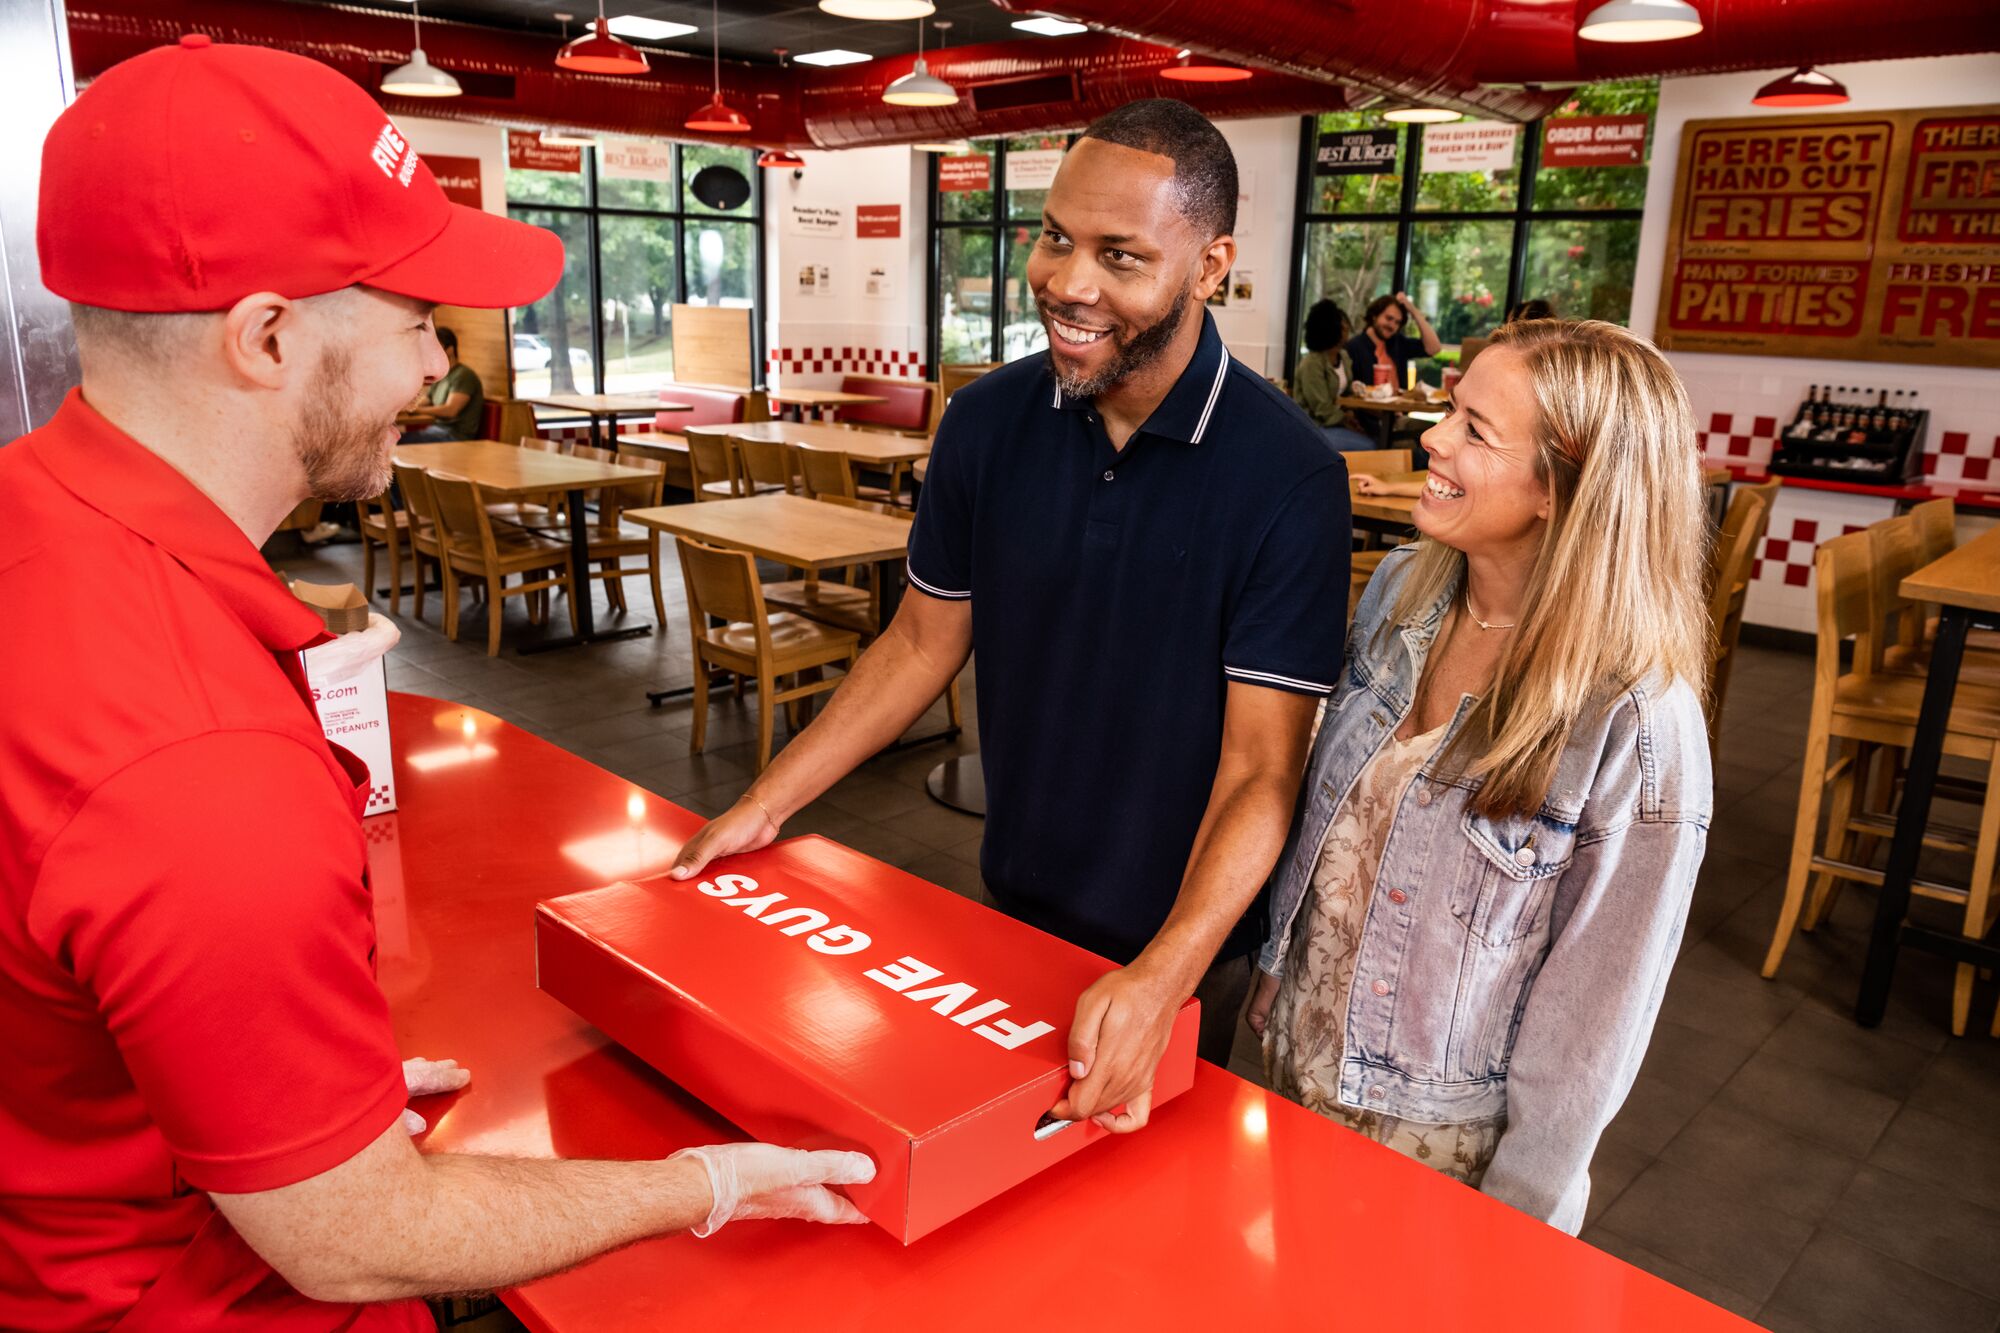 A couple collect their Five Guys catering box from a Five Guys employee at a Five Guys restaurant. Five Guys Thousand Oaks (805)496-0173